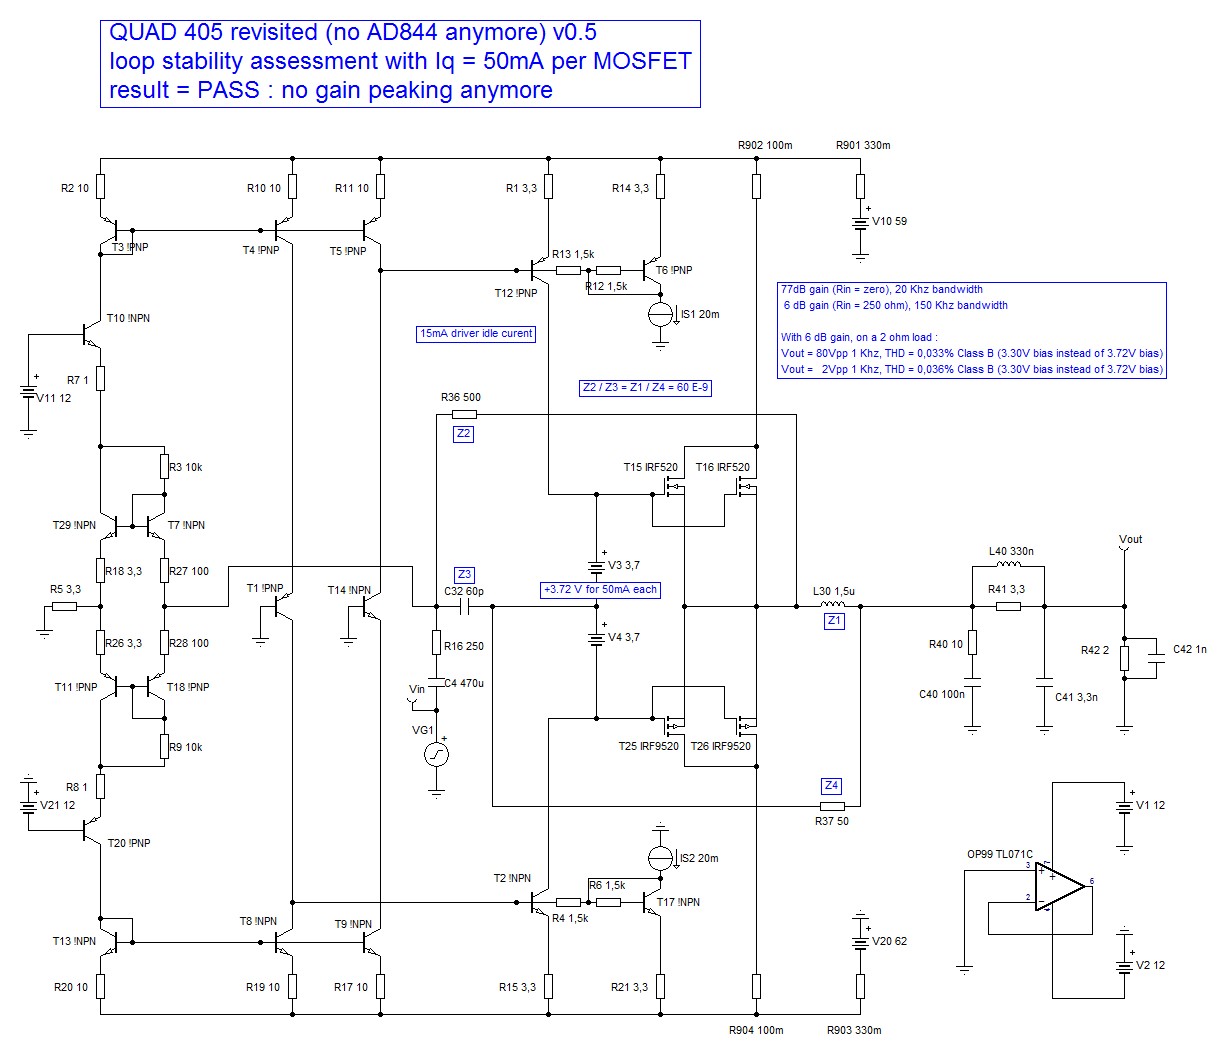 164113d1269563050-quad-405-revisited-ad844-vertical-mosfets-quad-405-revisited-no-ad844-anymore-v0.5.jpg